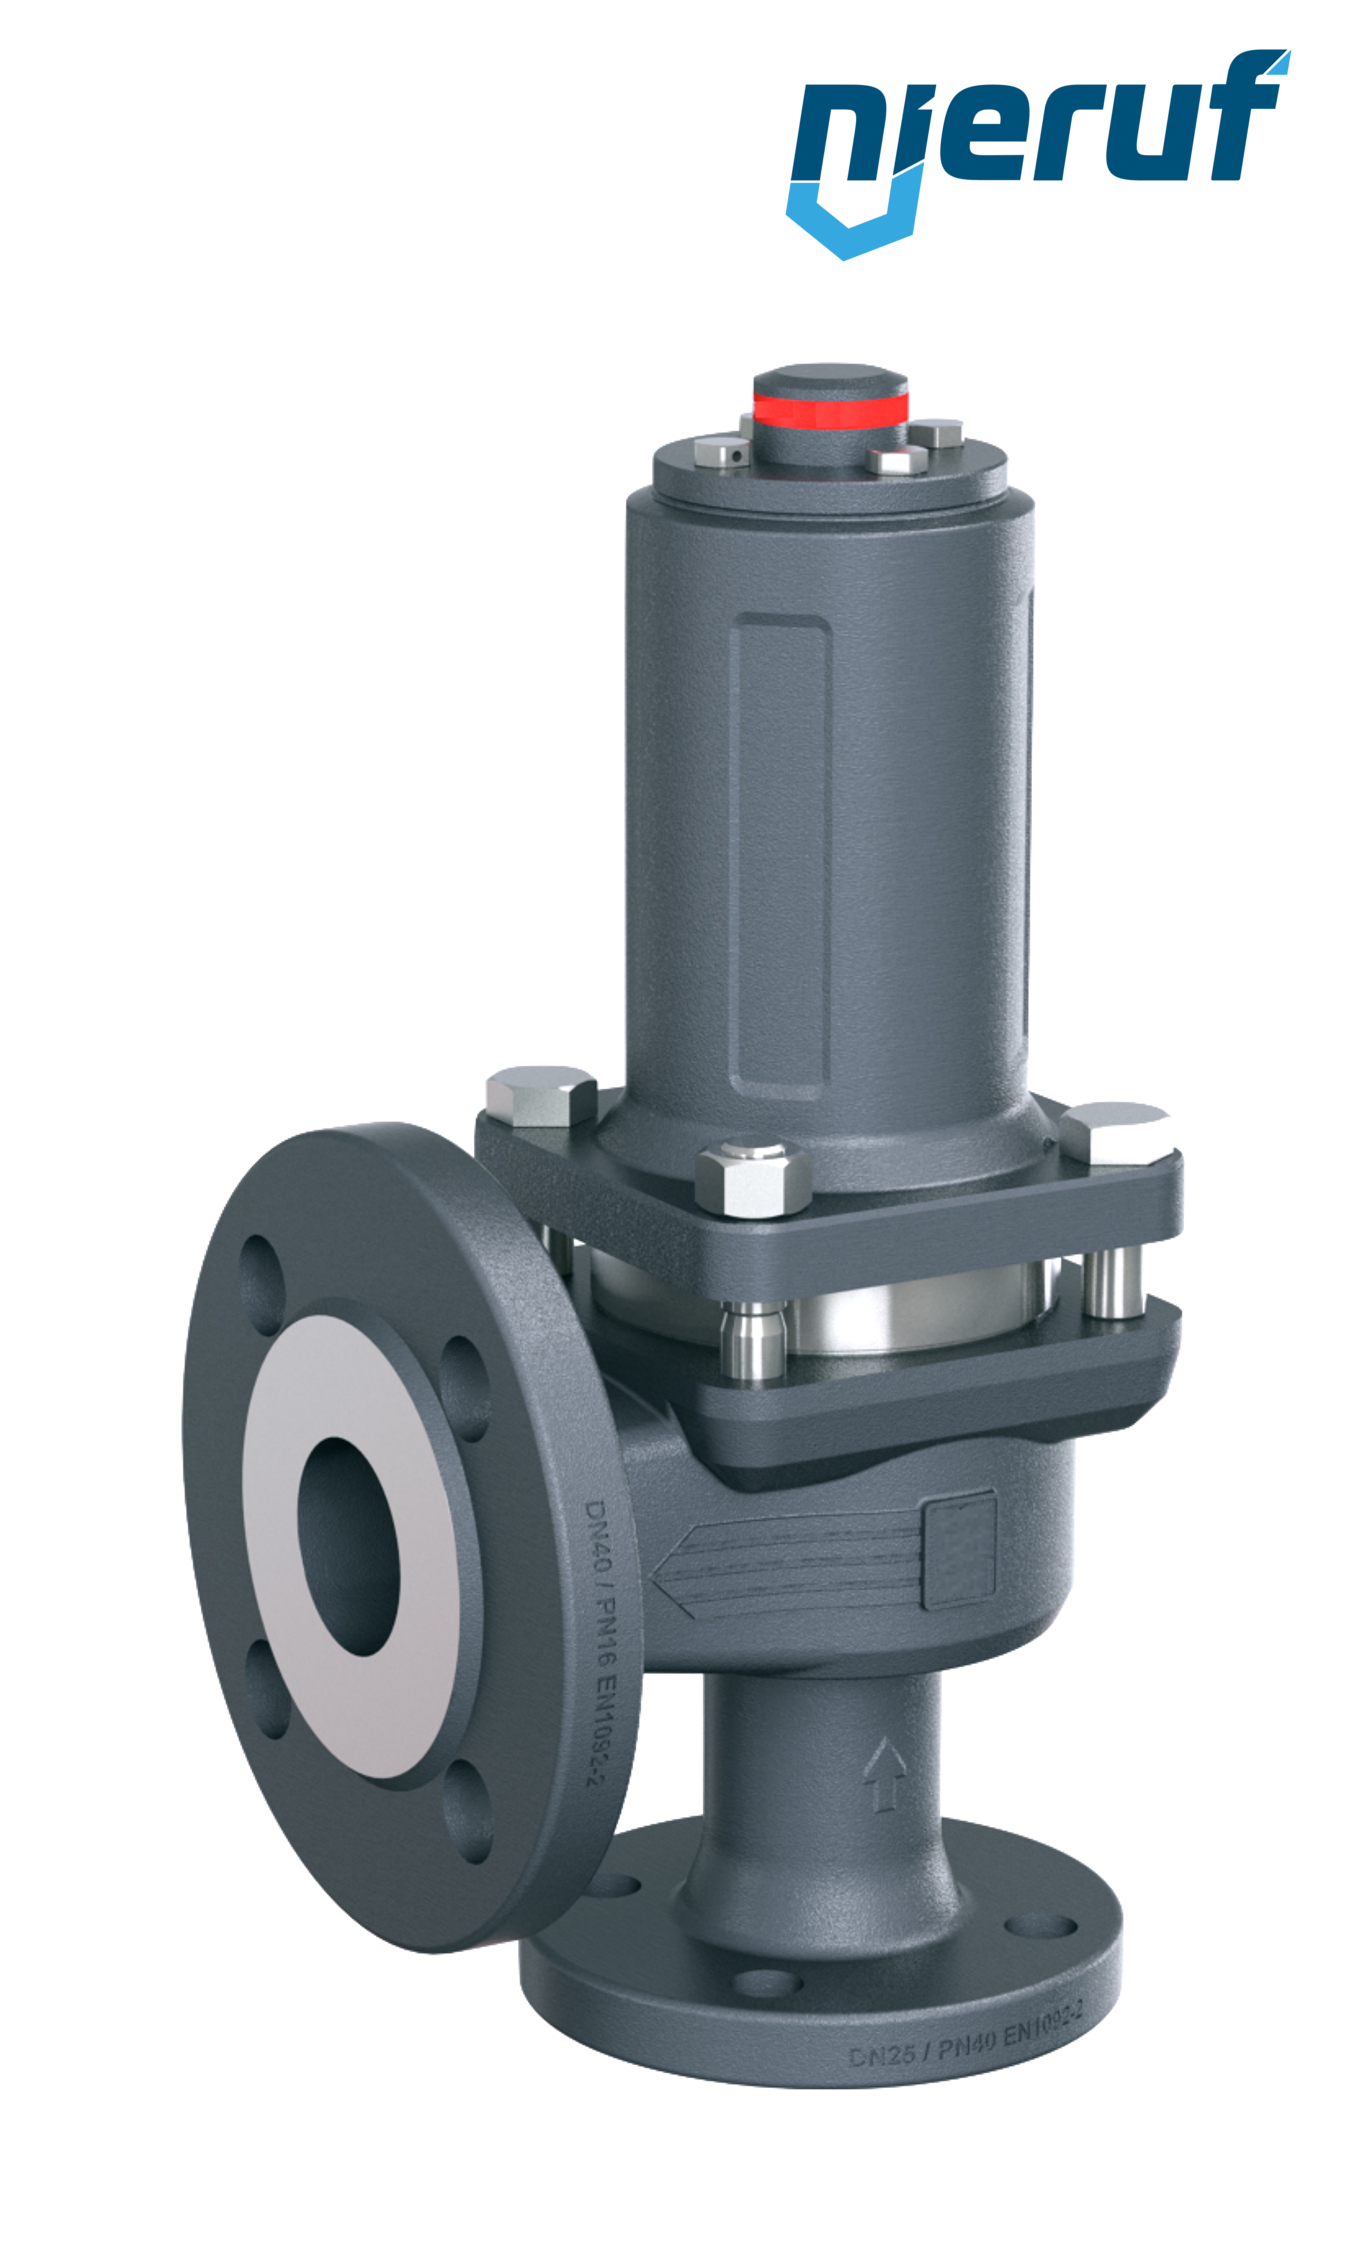 flange-safety valve DN100/DN150 SF06, gastight bonnet EPDM, without lifting device